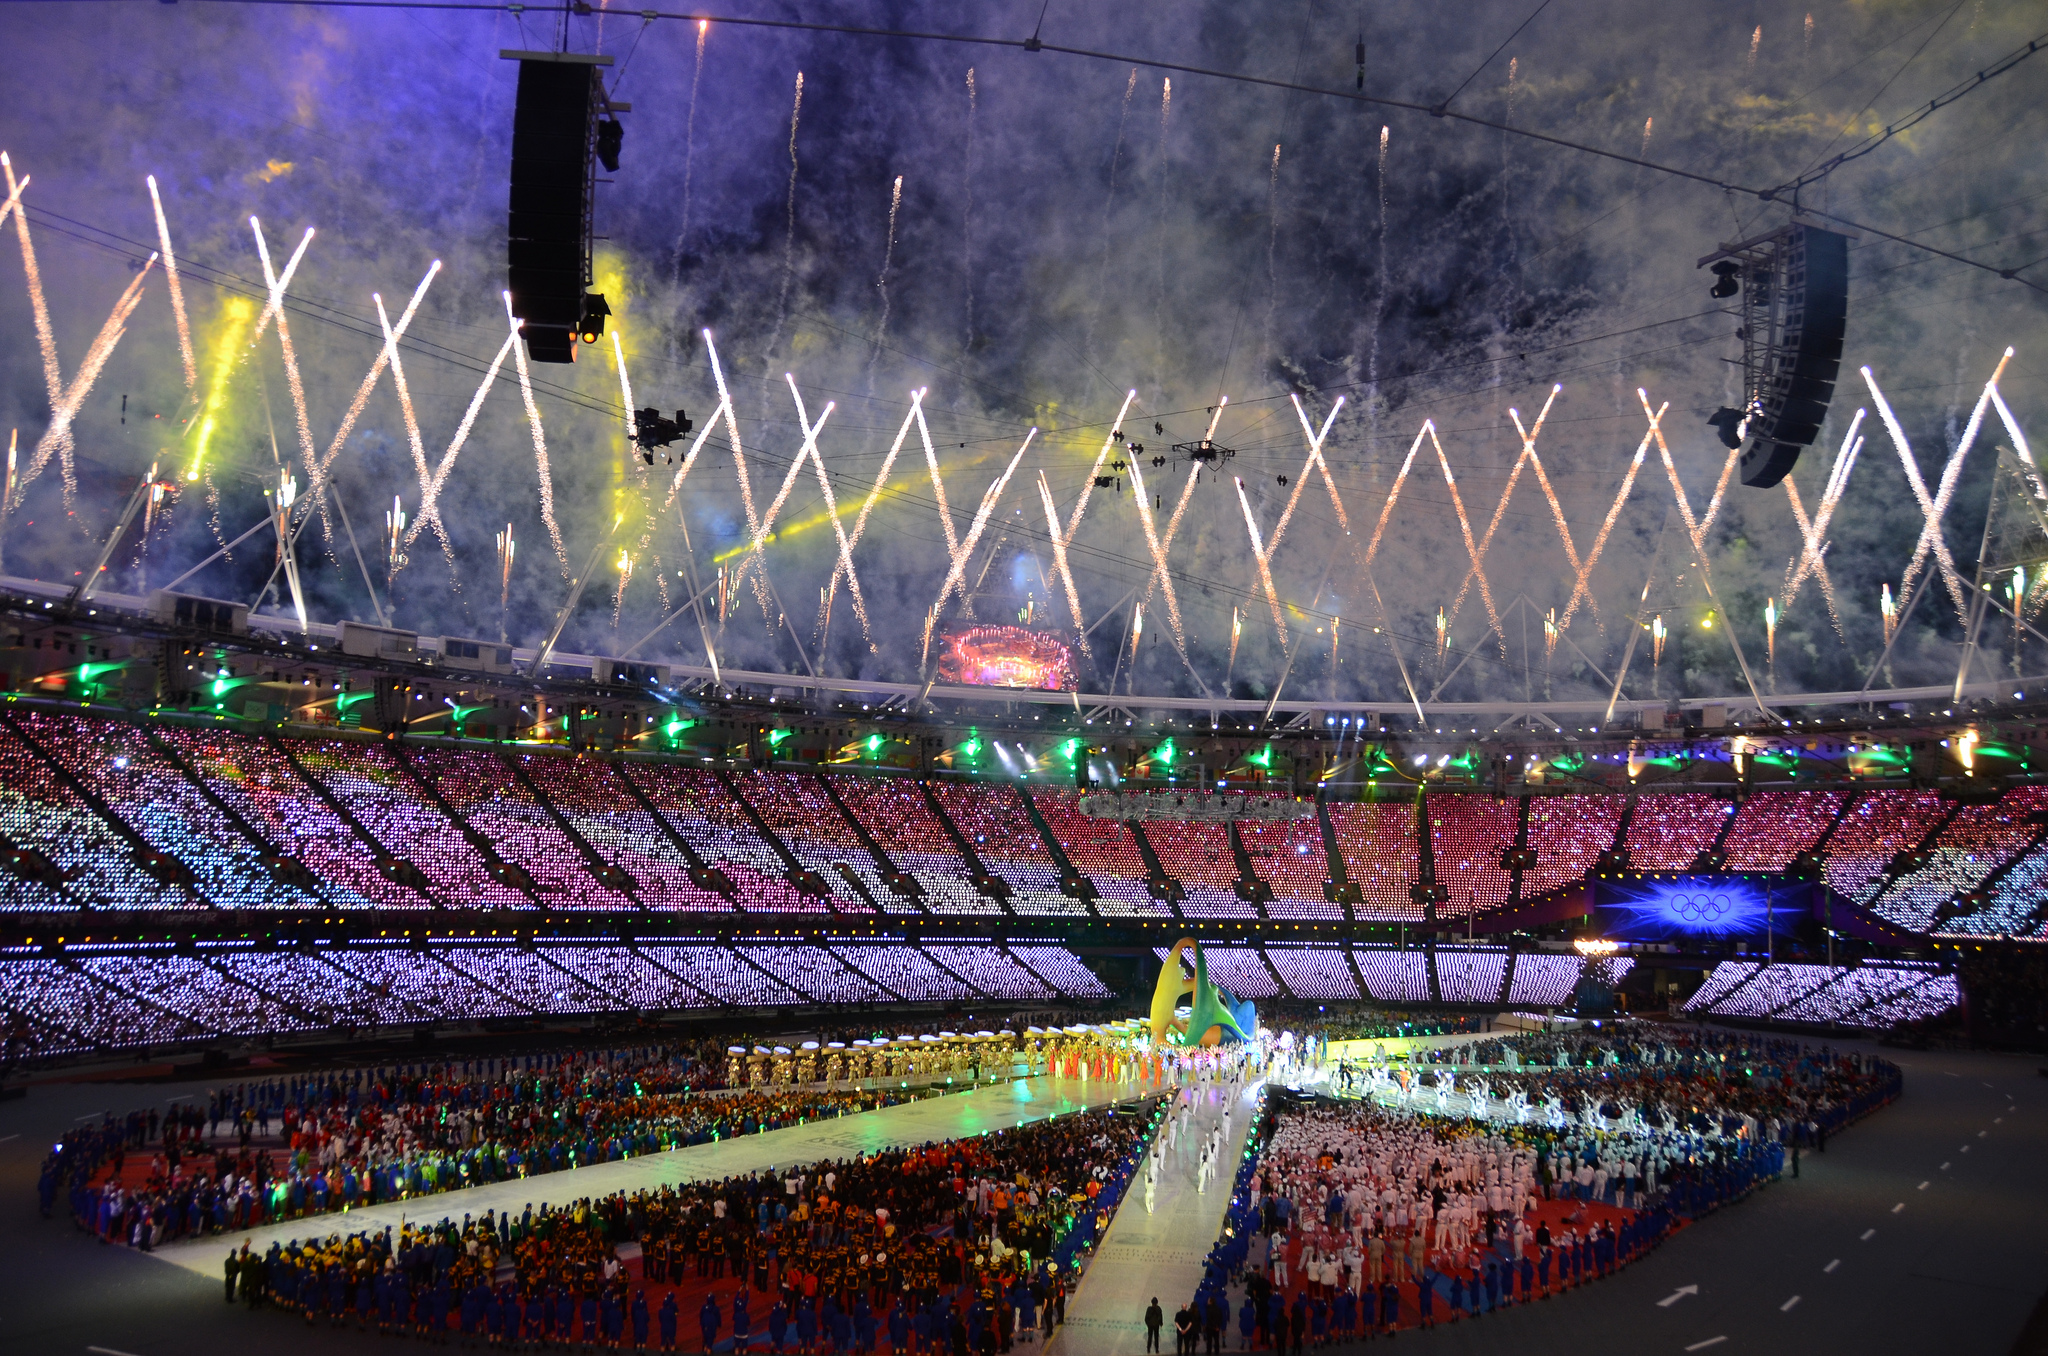 How to watch Rio Olympics 2016 Closing Ceremony Online